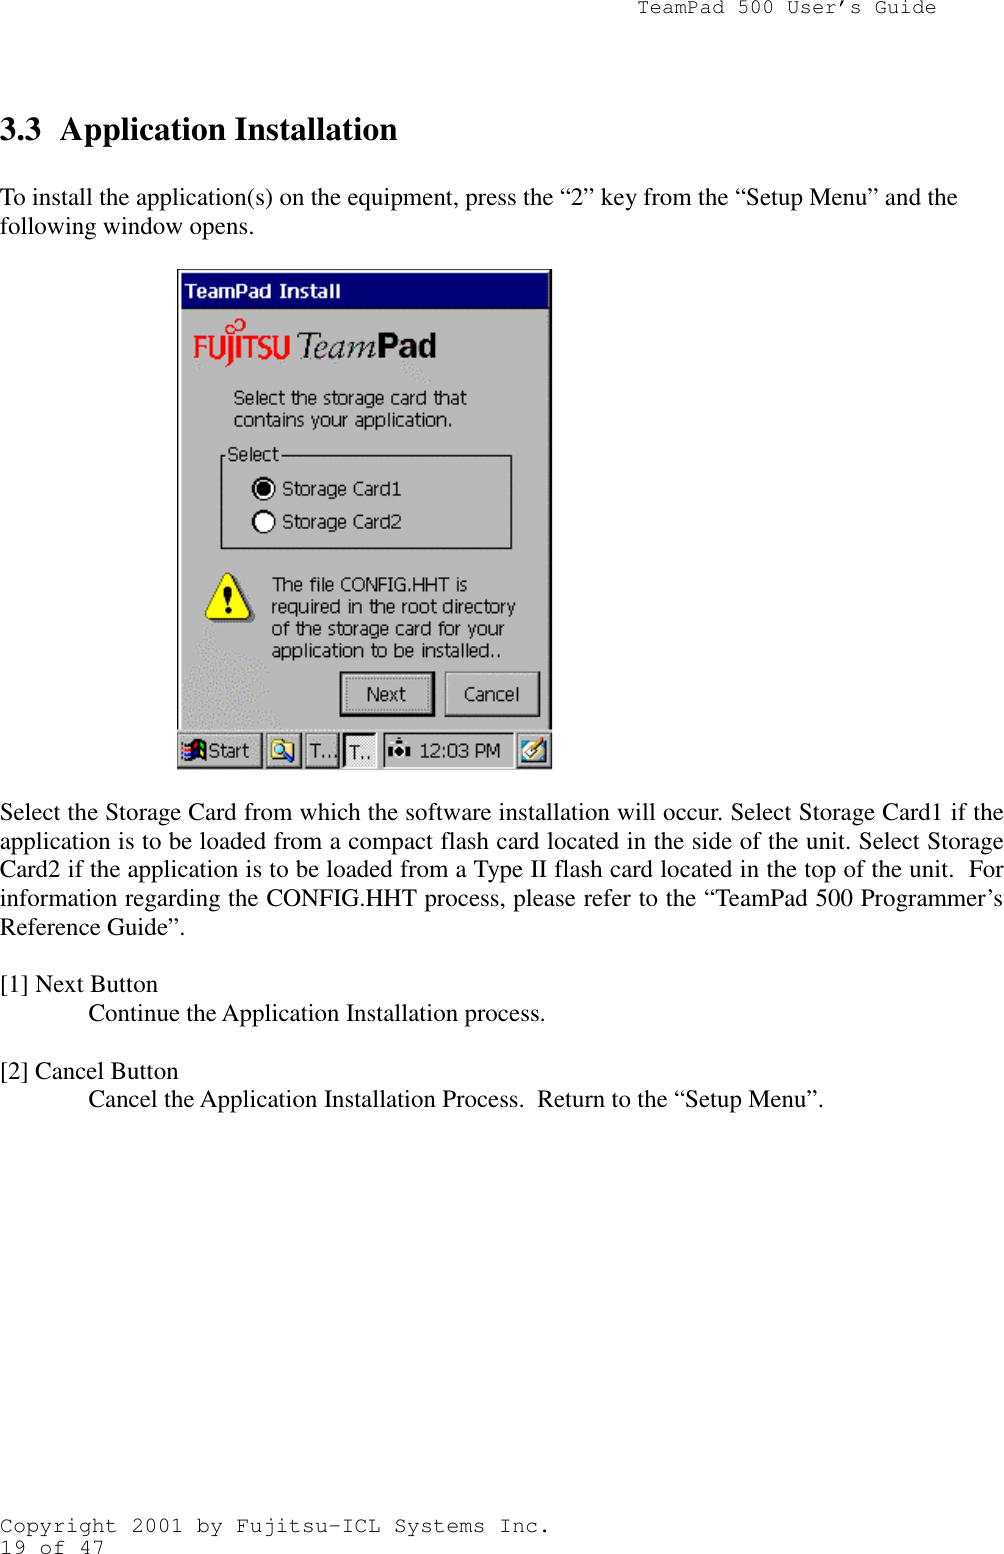                TeamPad 500 User’s GuideCopyright 2001 by Fujitsu-ICL Systems Inc.19 of 473.3 Application InstallationTo install the application(s) on the equipment, press the “2” key from the “Setup Menu” and thefollowing window opens.Select the Storage Card from which the software installation will occur. Select Storage Card1 if theapplication is to be loaded from a compact flash card located in the side of the unit. Select StorageCard2 if the application is to be loaded from a Type II flash card located in the top of the unit.  Forinformation regarding the CONFIG.HHT process, please refer to the “TeamPad 500 Programmer’sReference Guide”.[1] Next ButtonContinue the Application Installation process.[2] Cancel ButtonCancel the Application Installation Process.  Return to the “Setup Menu”.